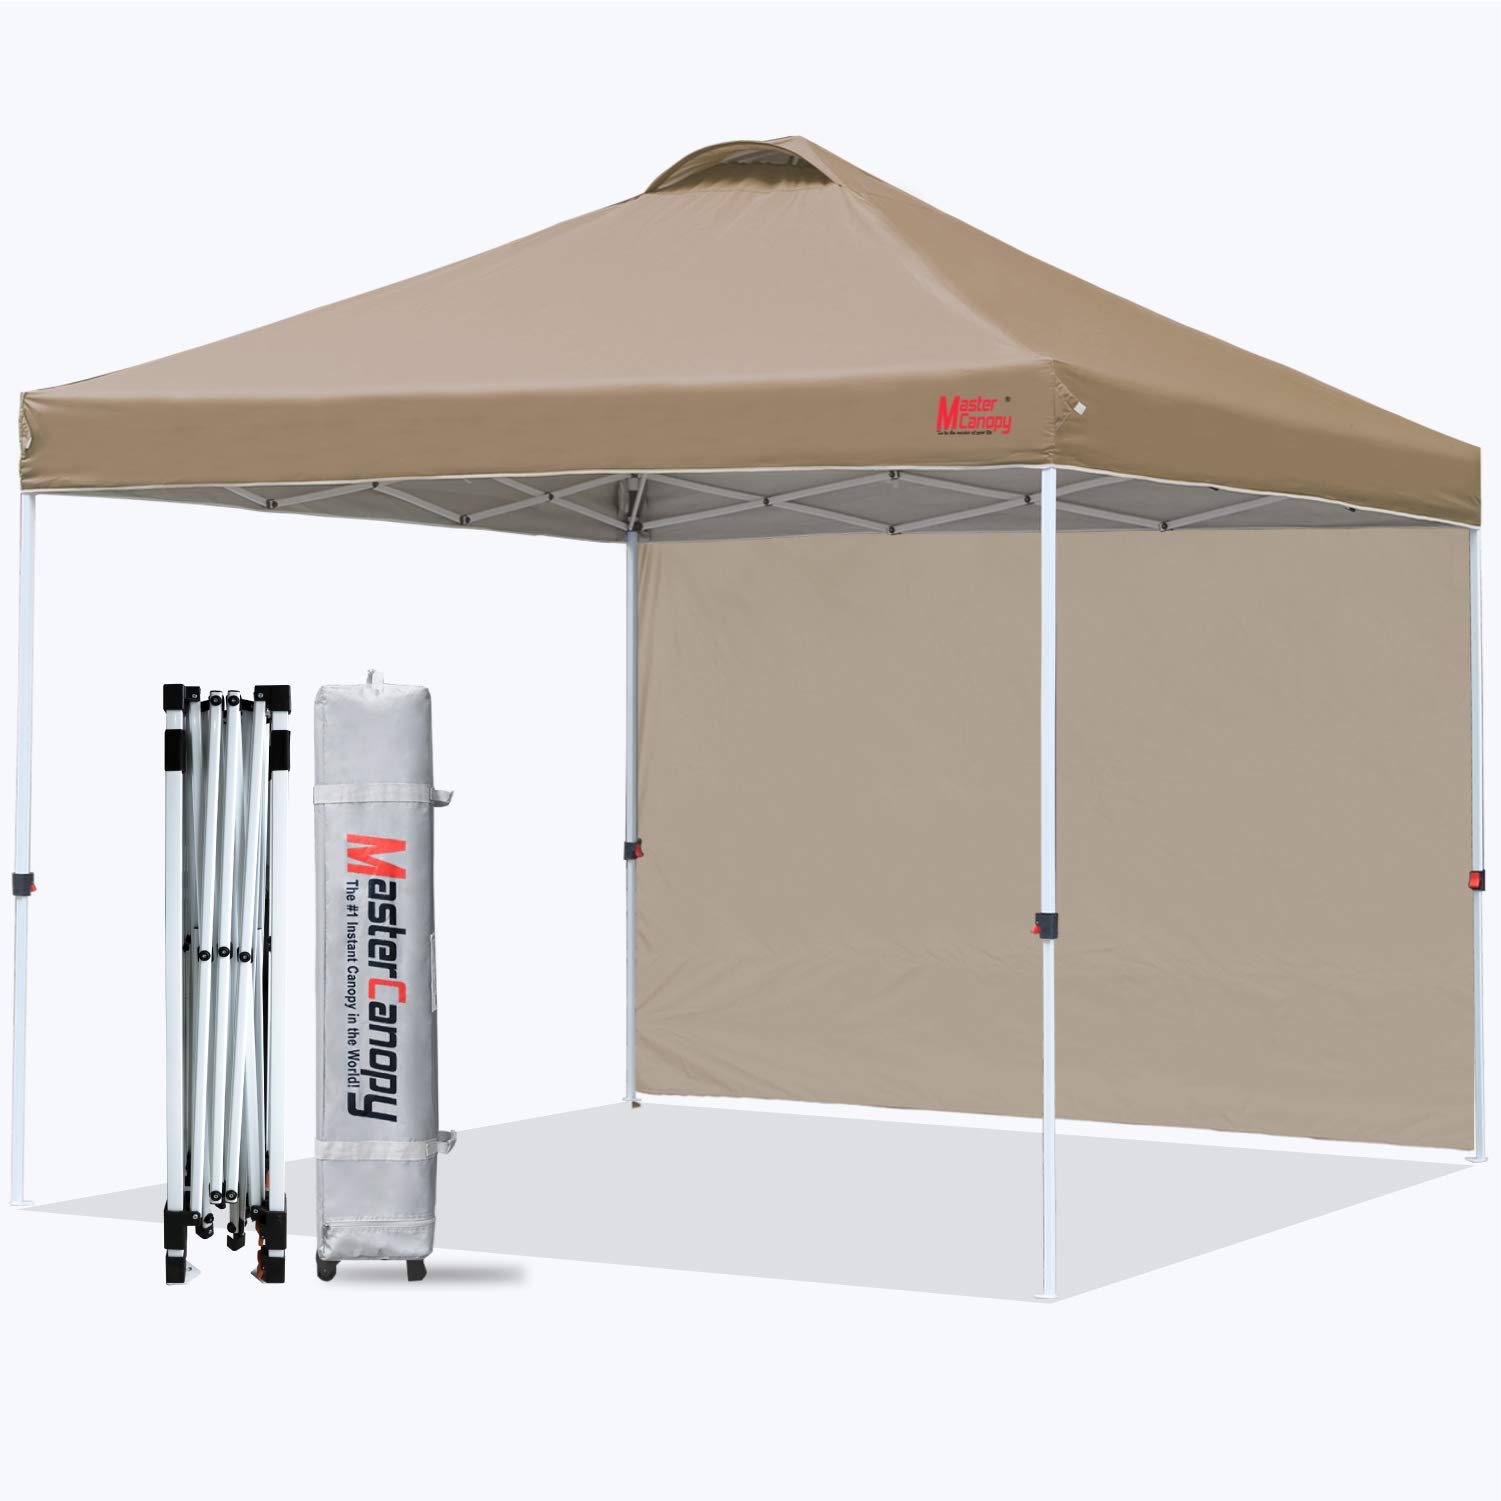 MASTERCANOPY Patio Pop Up Instant shelter Beach Canopy Better Air Circulation Canopy with Wheeled Backpack Carry Bag 8x8 ft, Khaki 